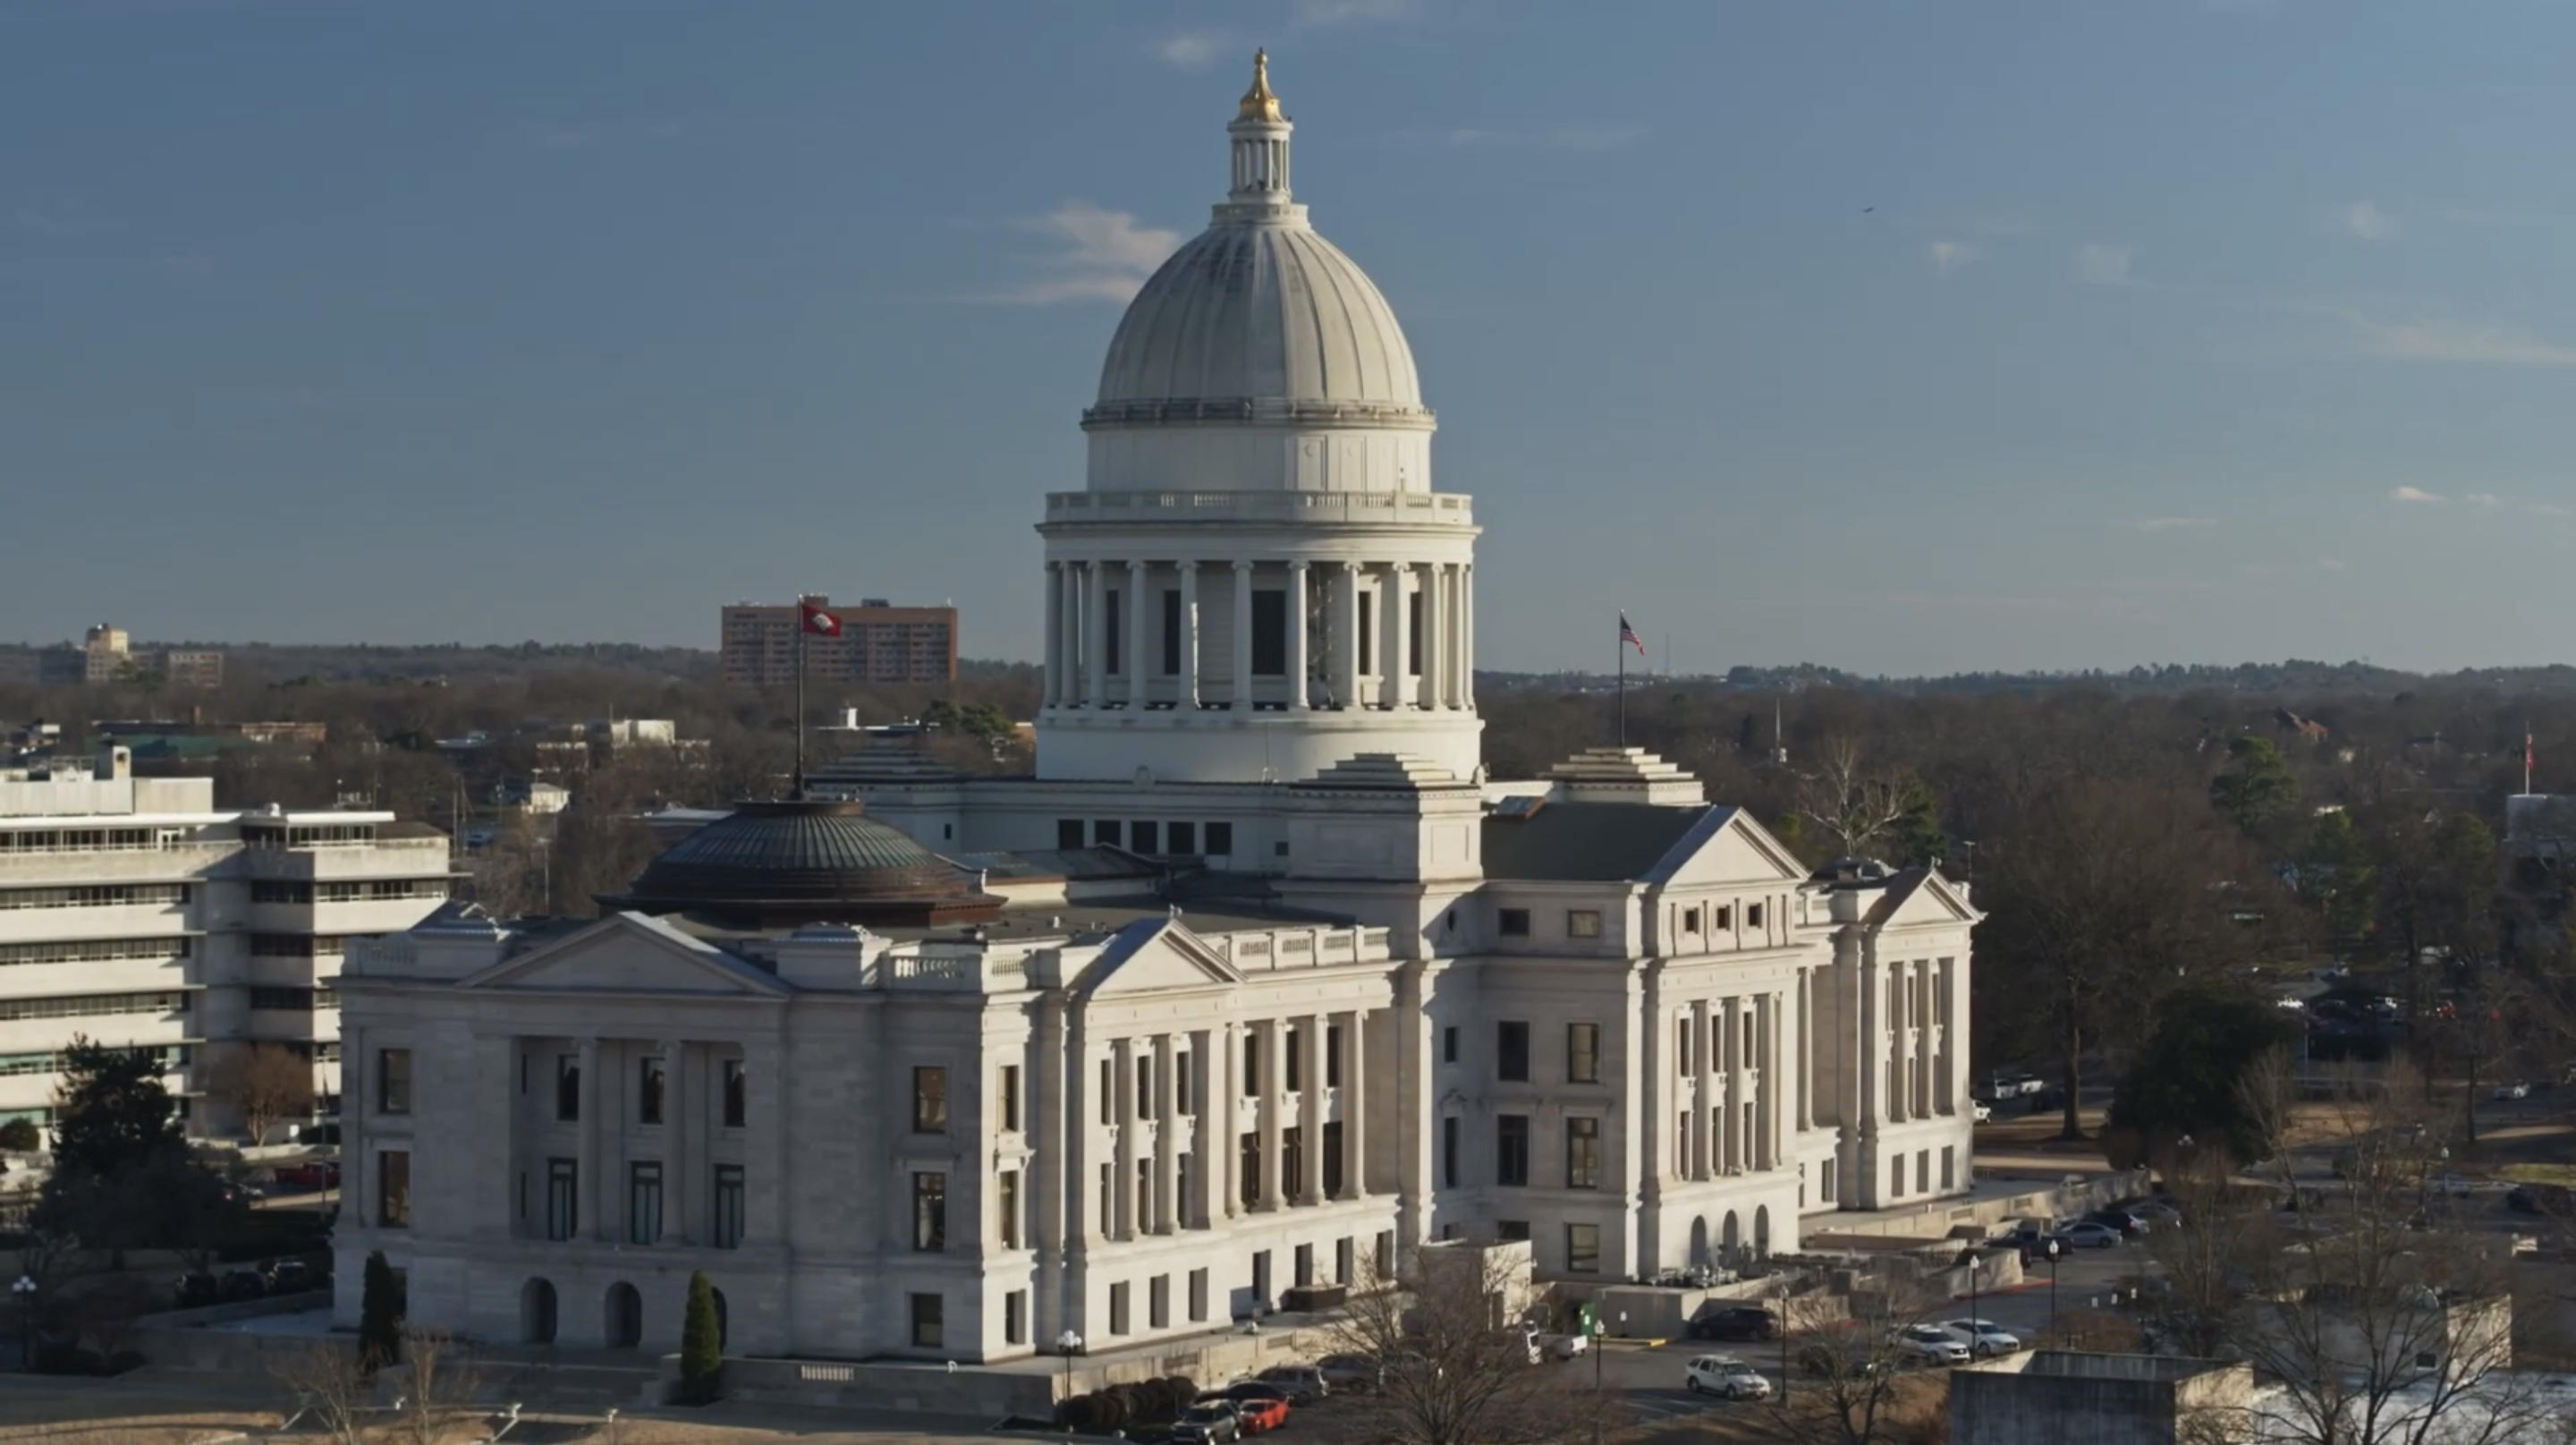 An arial shot of the Arkansas State Capitol building